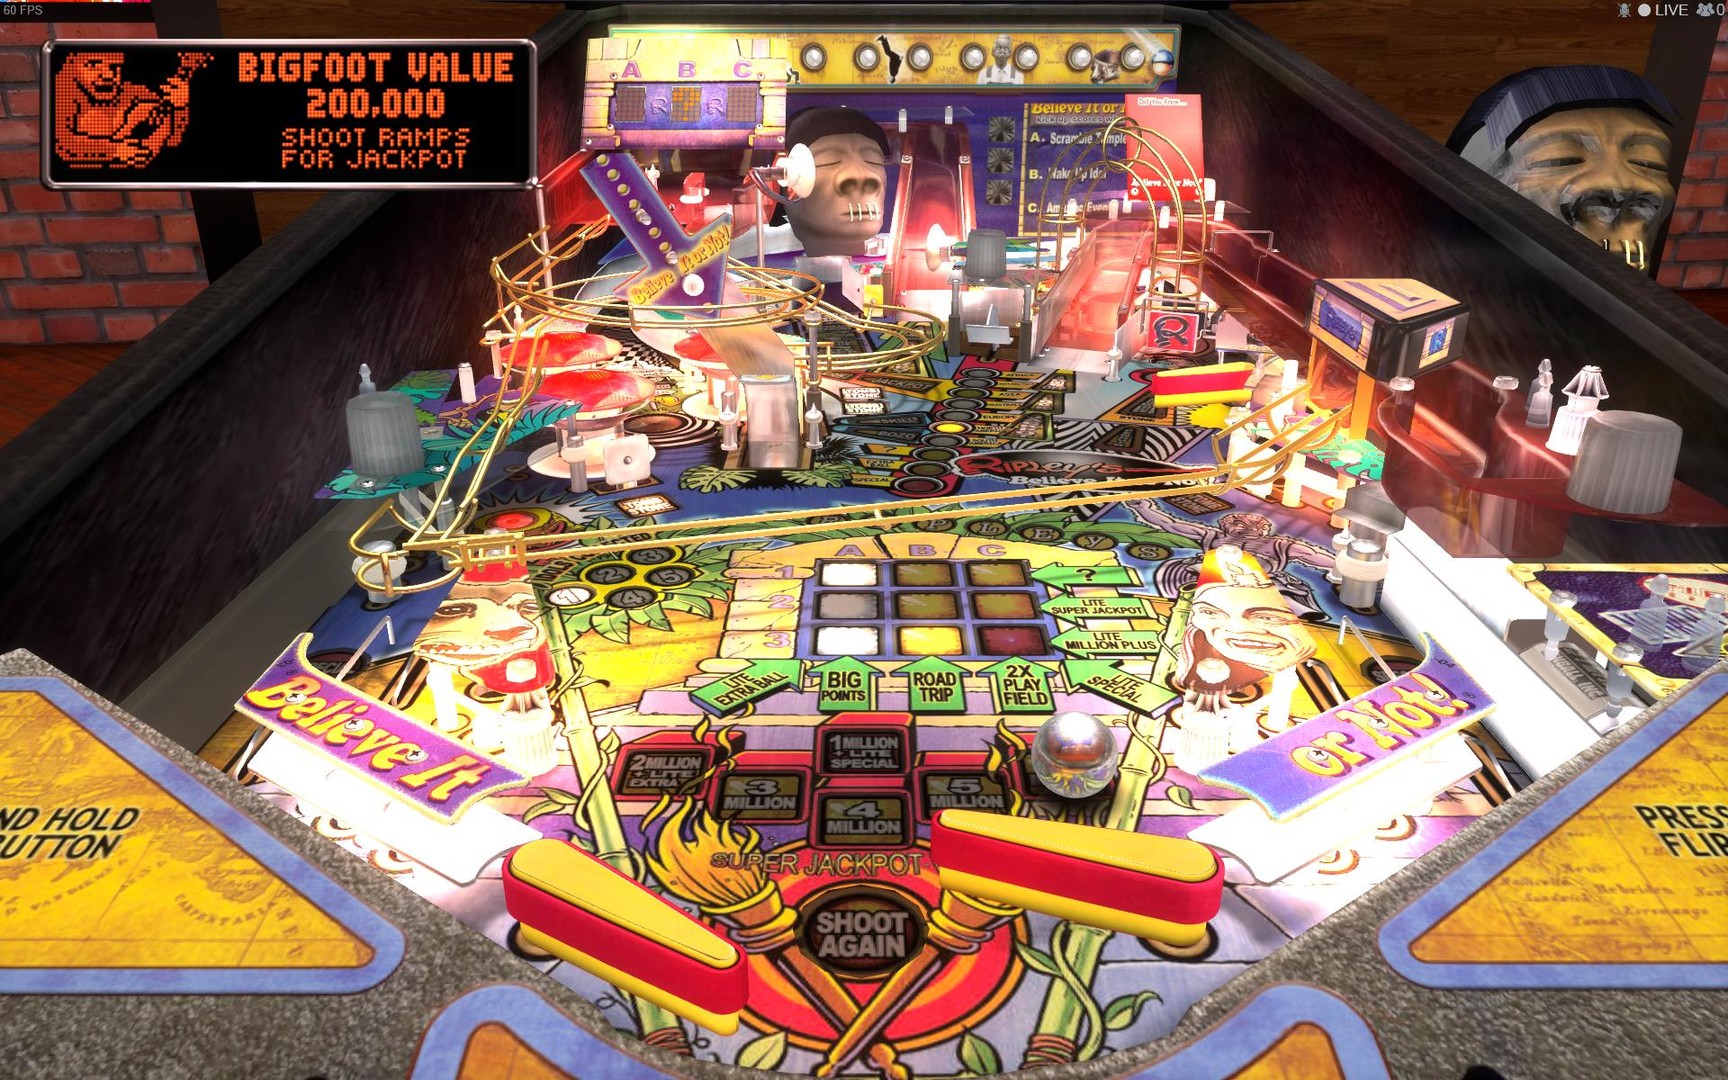 Not Your Father's Pinball Arcade. But Maybe Your Mother's. - The New York  Times